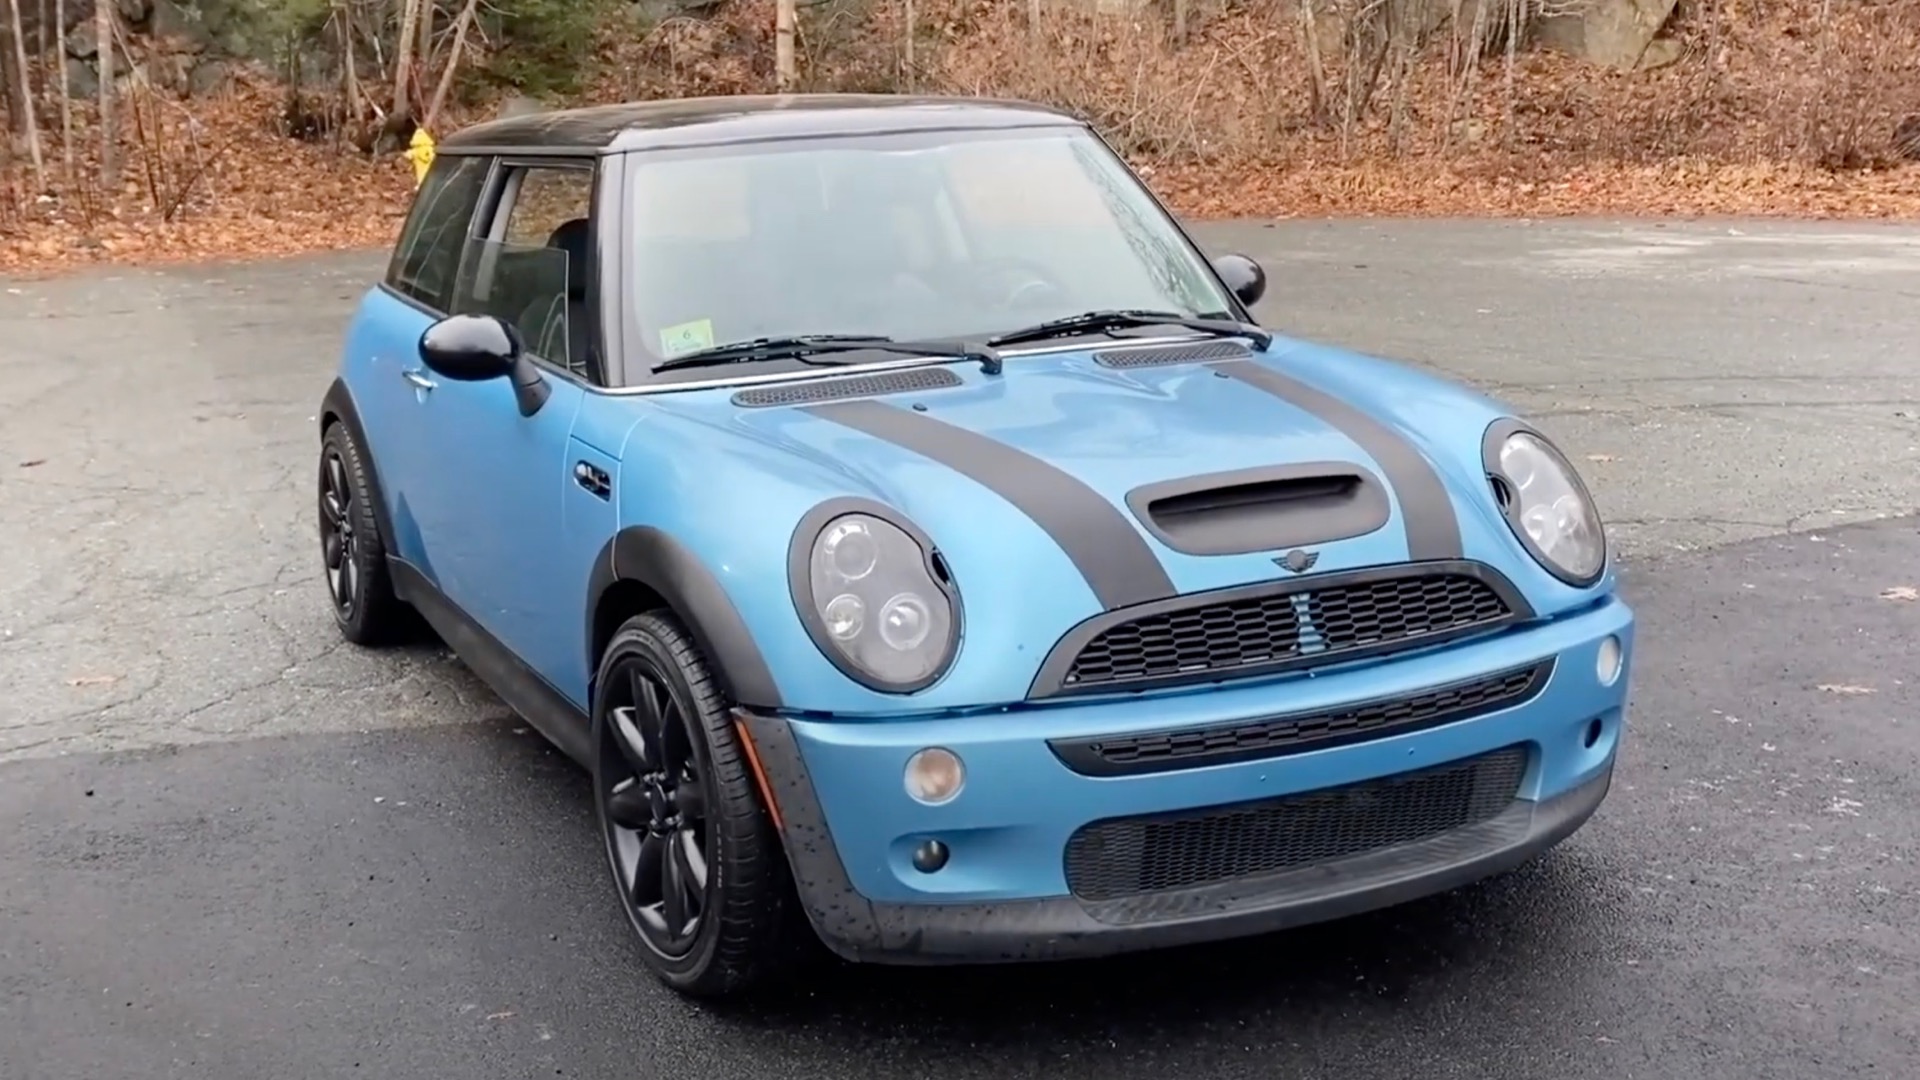 Mivo Link 3,000 DIY electric Mini Cooper is a fun exception among